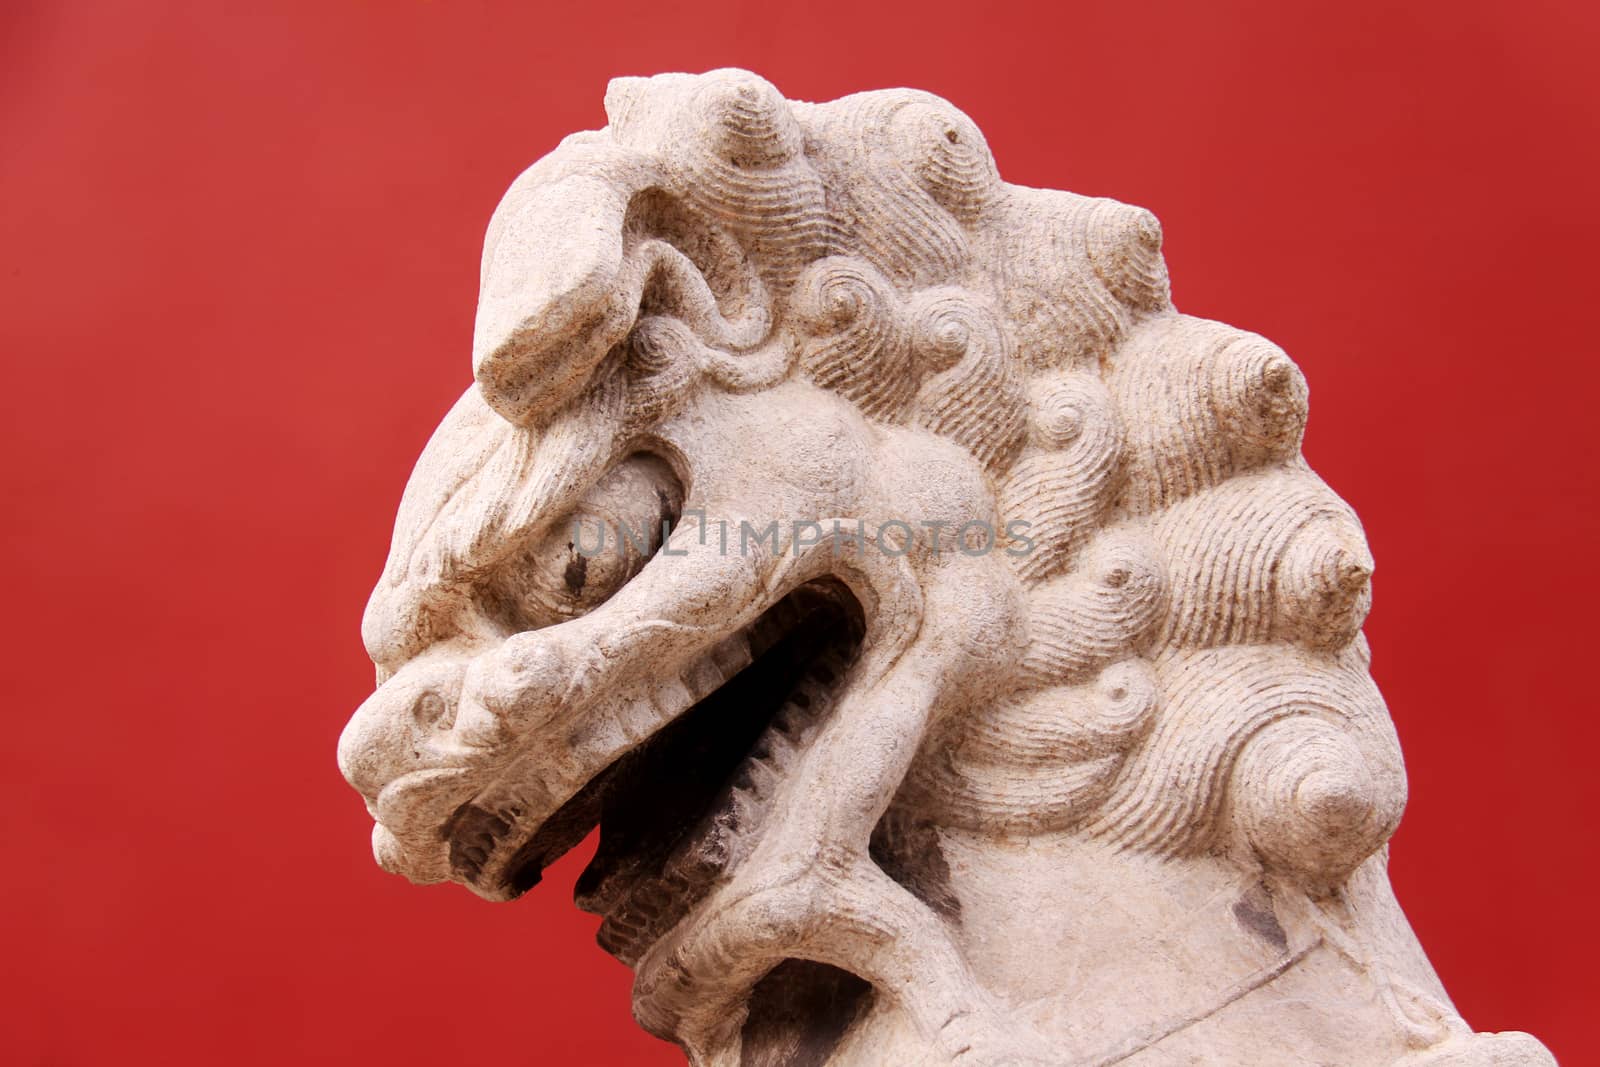 Lion on red background taken infront of an entrance on a garden of the Forbidden City in Beijing, China